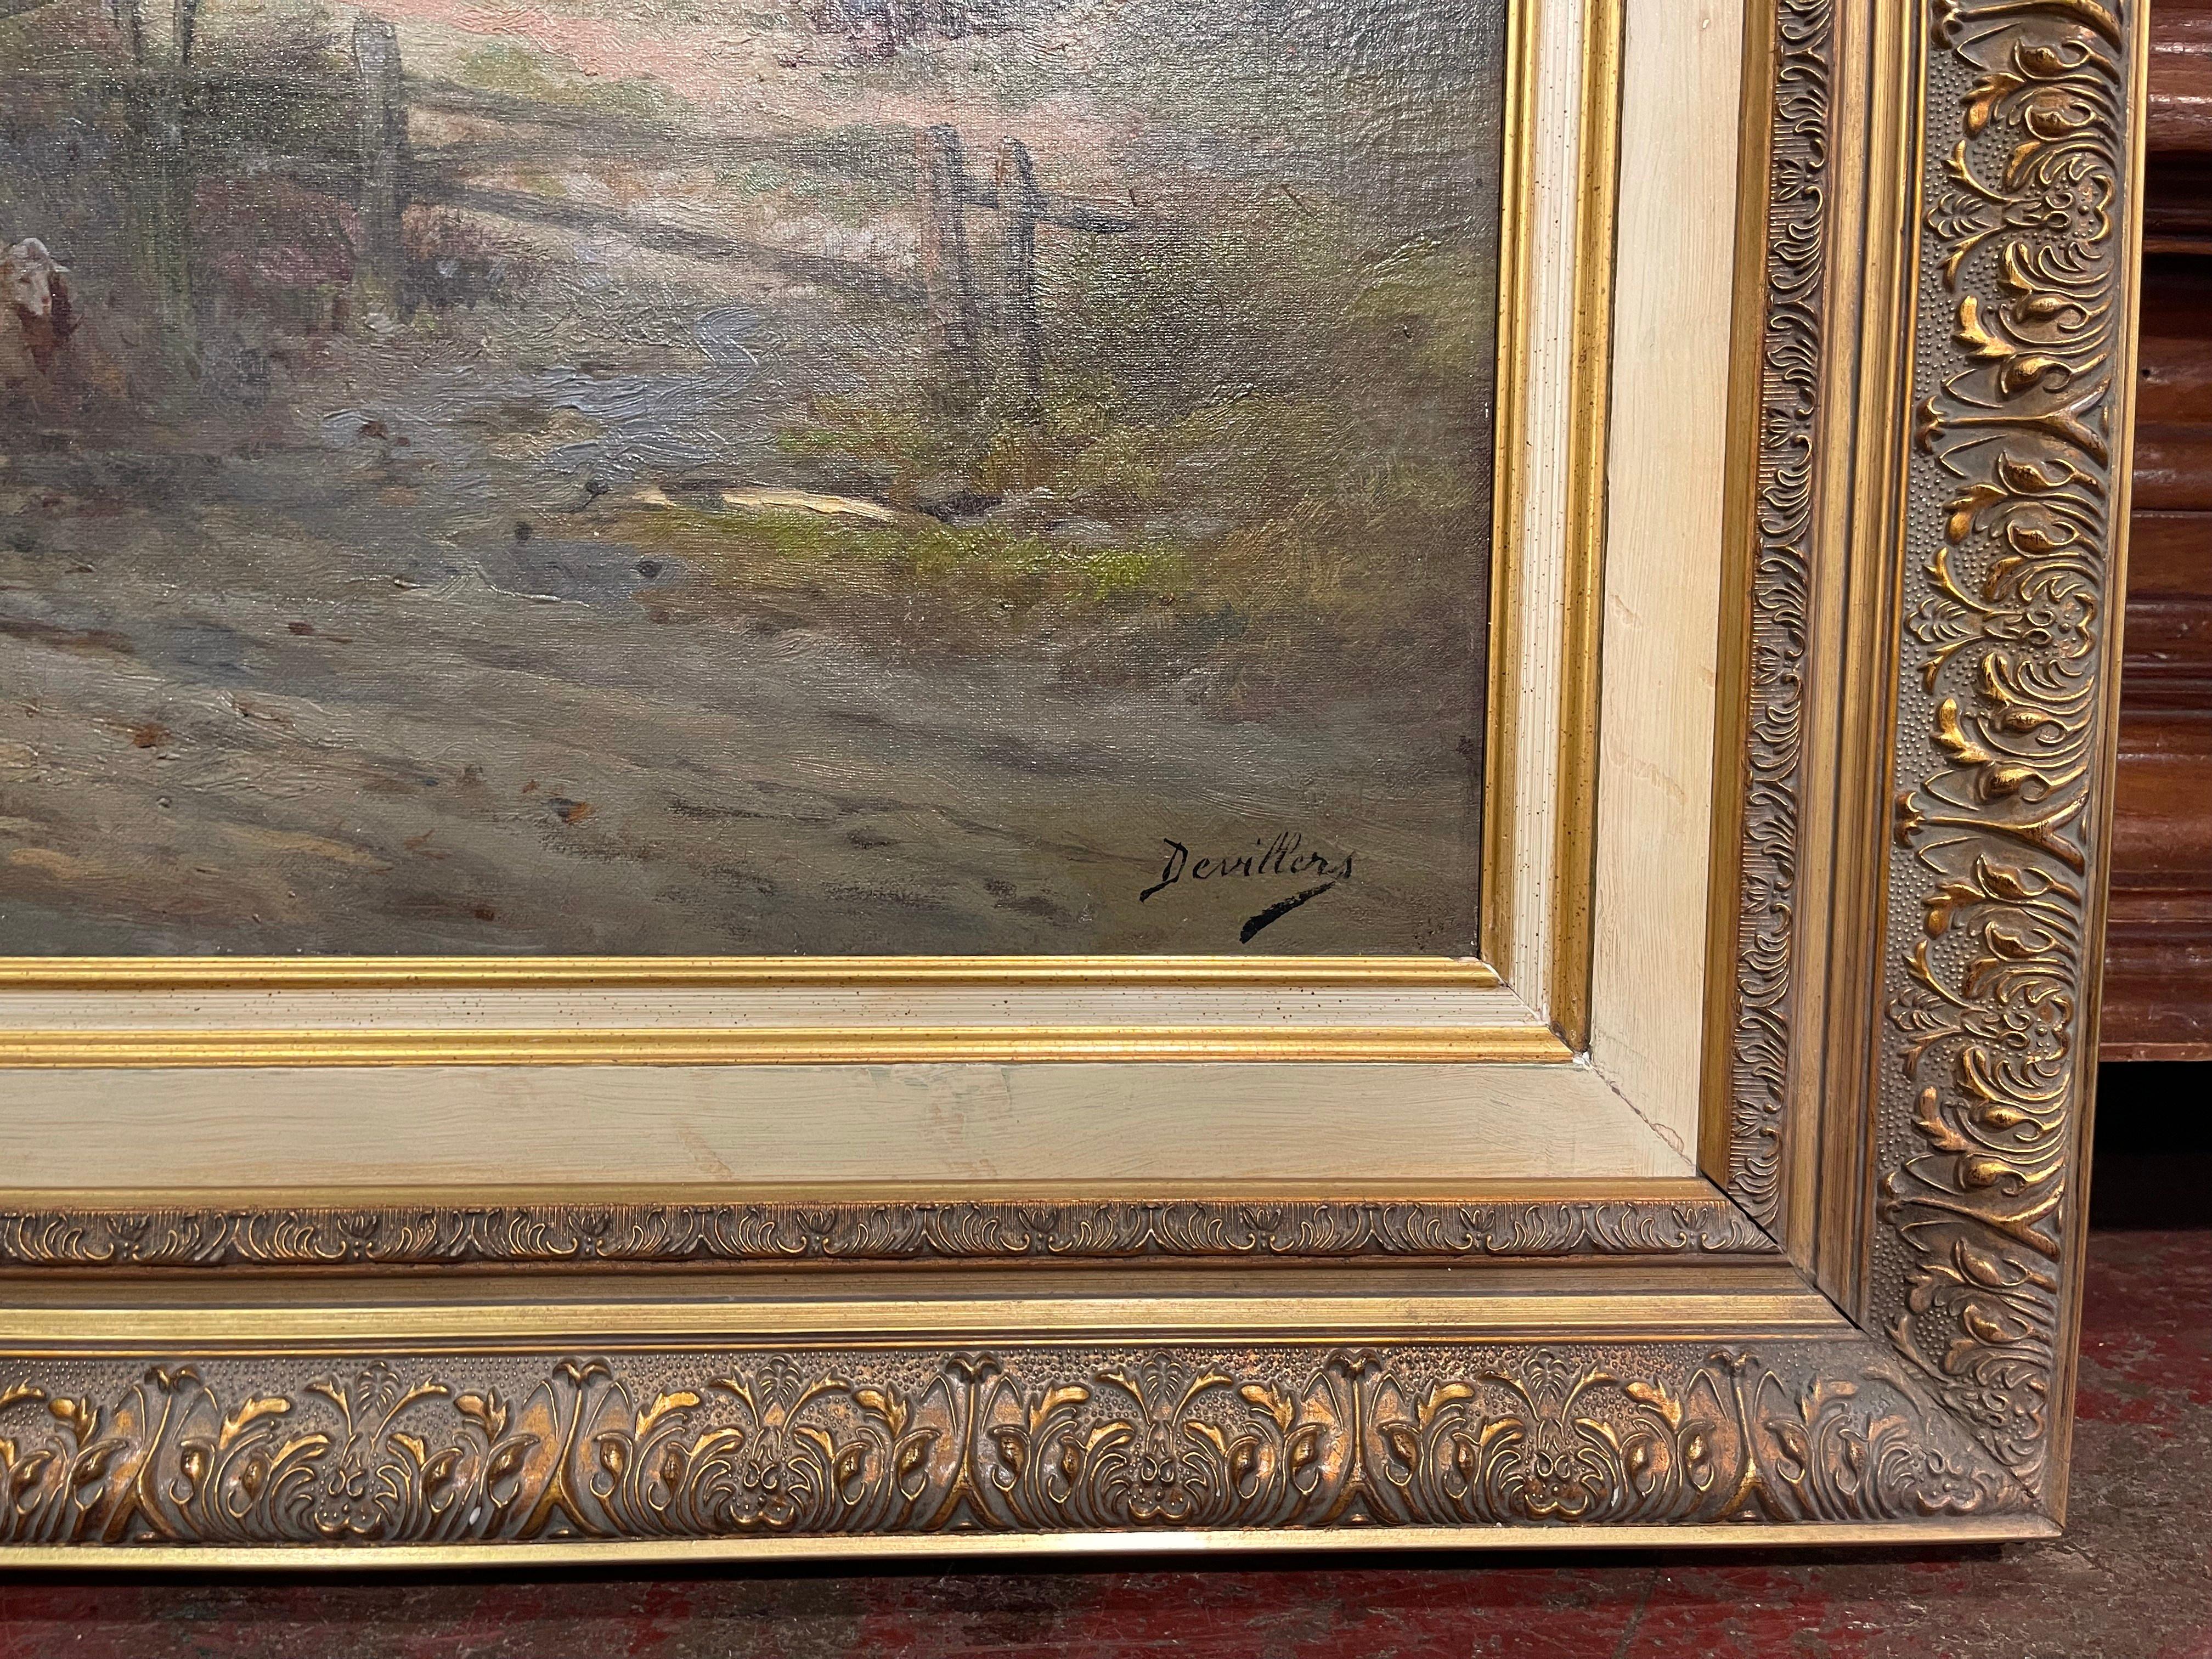 19th Century French Sheep Oil Painting in Carved Gilt Frame Signed Devillers In Excellent Condition For Sale In Dallas, TX